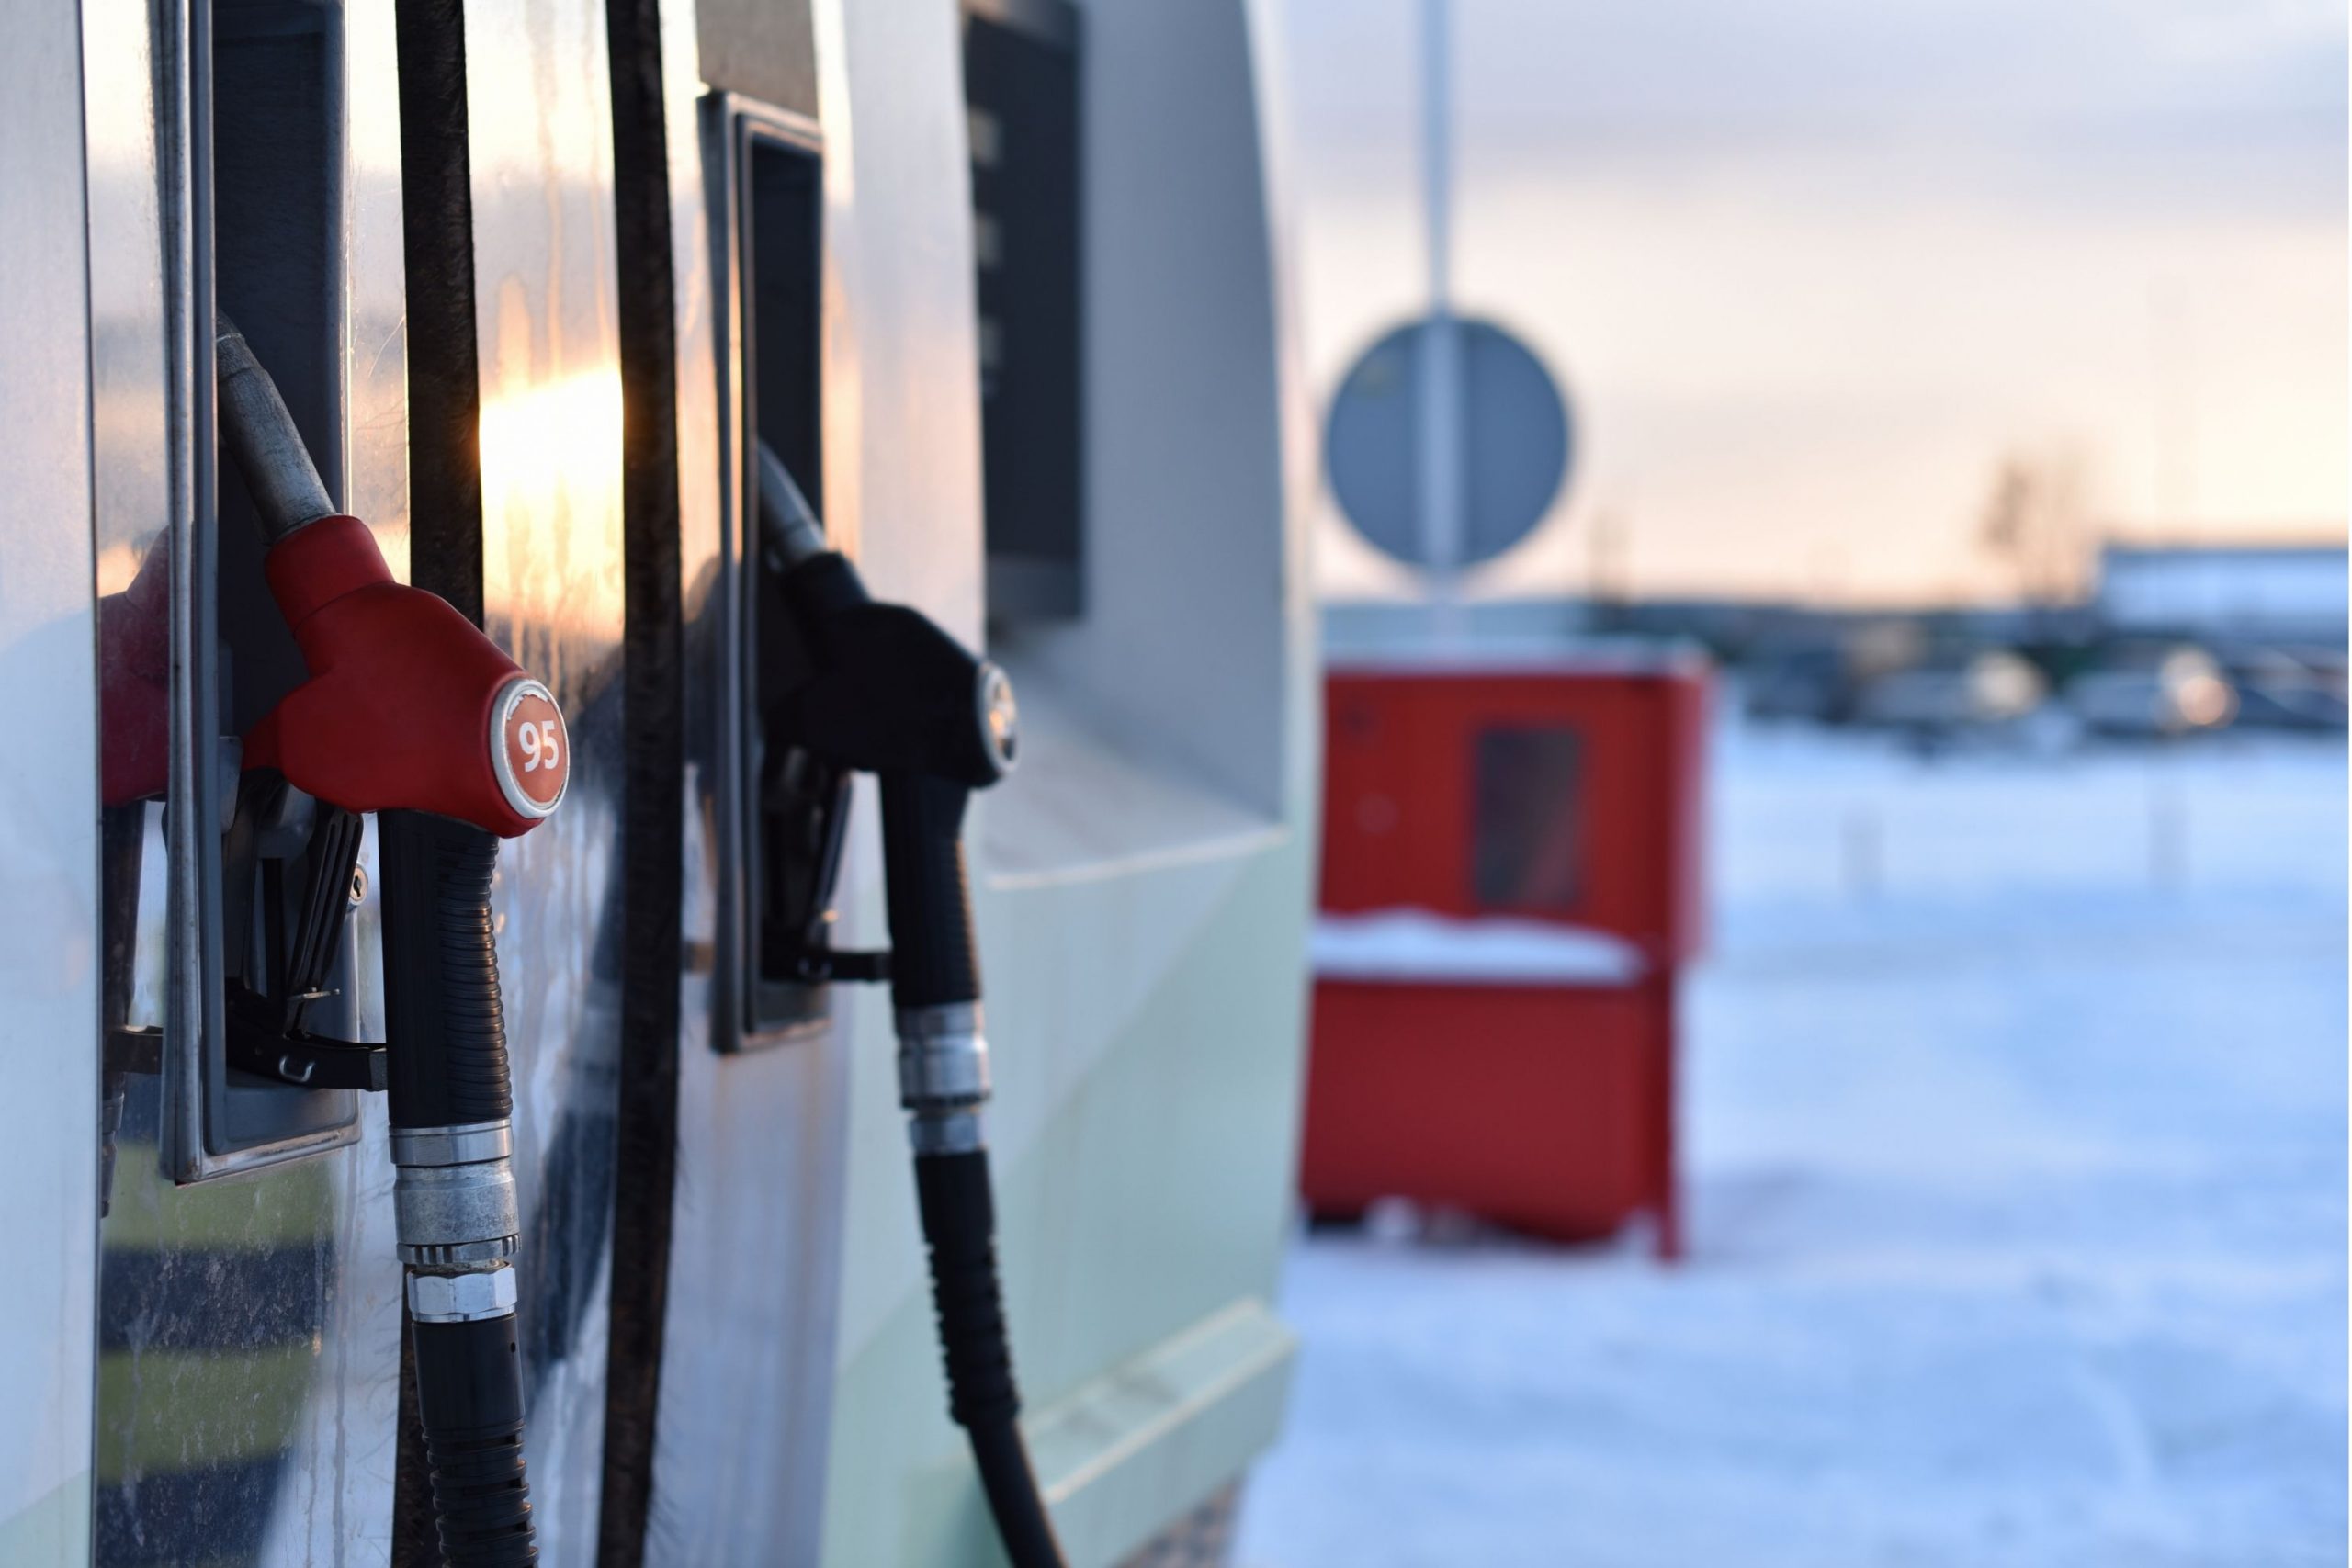 Key Signs About Frozen Fuel Every Driver Should Know About